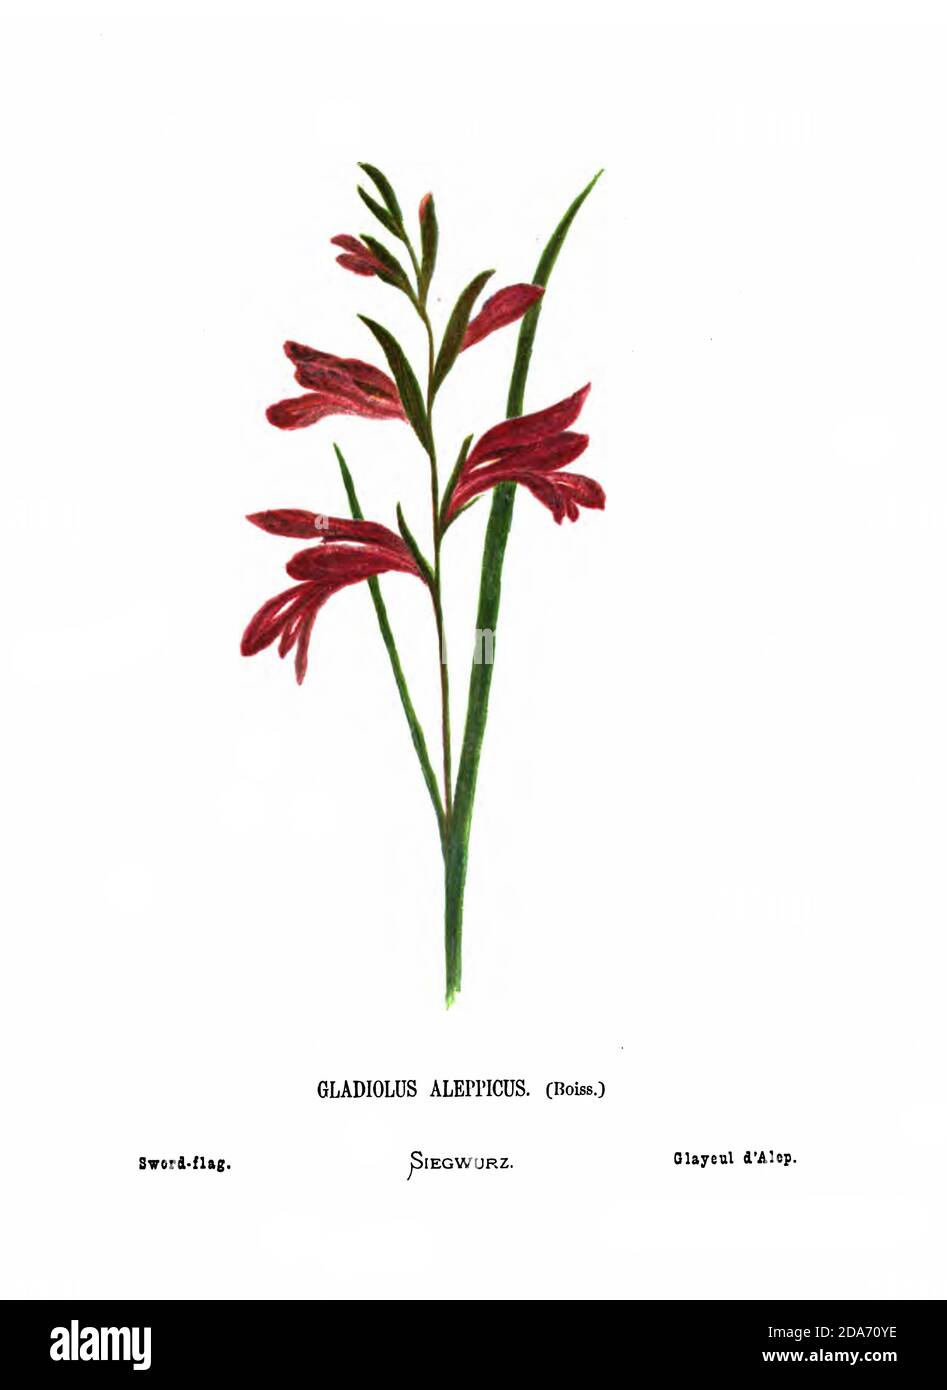 Sword flag or Corn flag (Gladiolus atroviolaceus) From the book Wild flowers of the Holy Land: Fifty-Four Plates Printed In Colours, Drawn And Painted After Nature. by Mrs. Hannah Zeller, (Gobat); Tristram, H. B. (Henry Baker), and Edward Atkinson, Published in London by James Nisbet & Co 1876 on white background Stock Photo